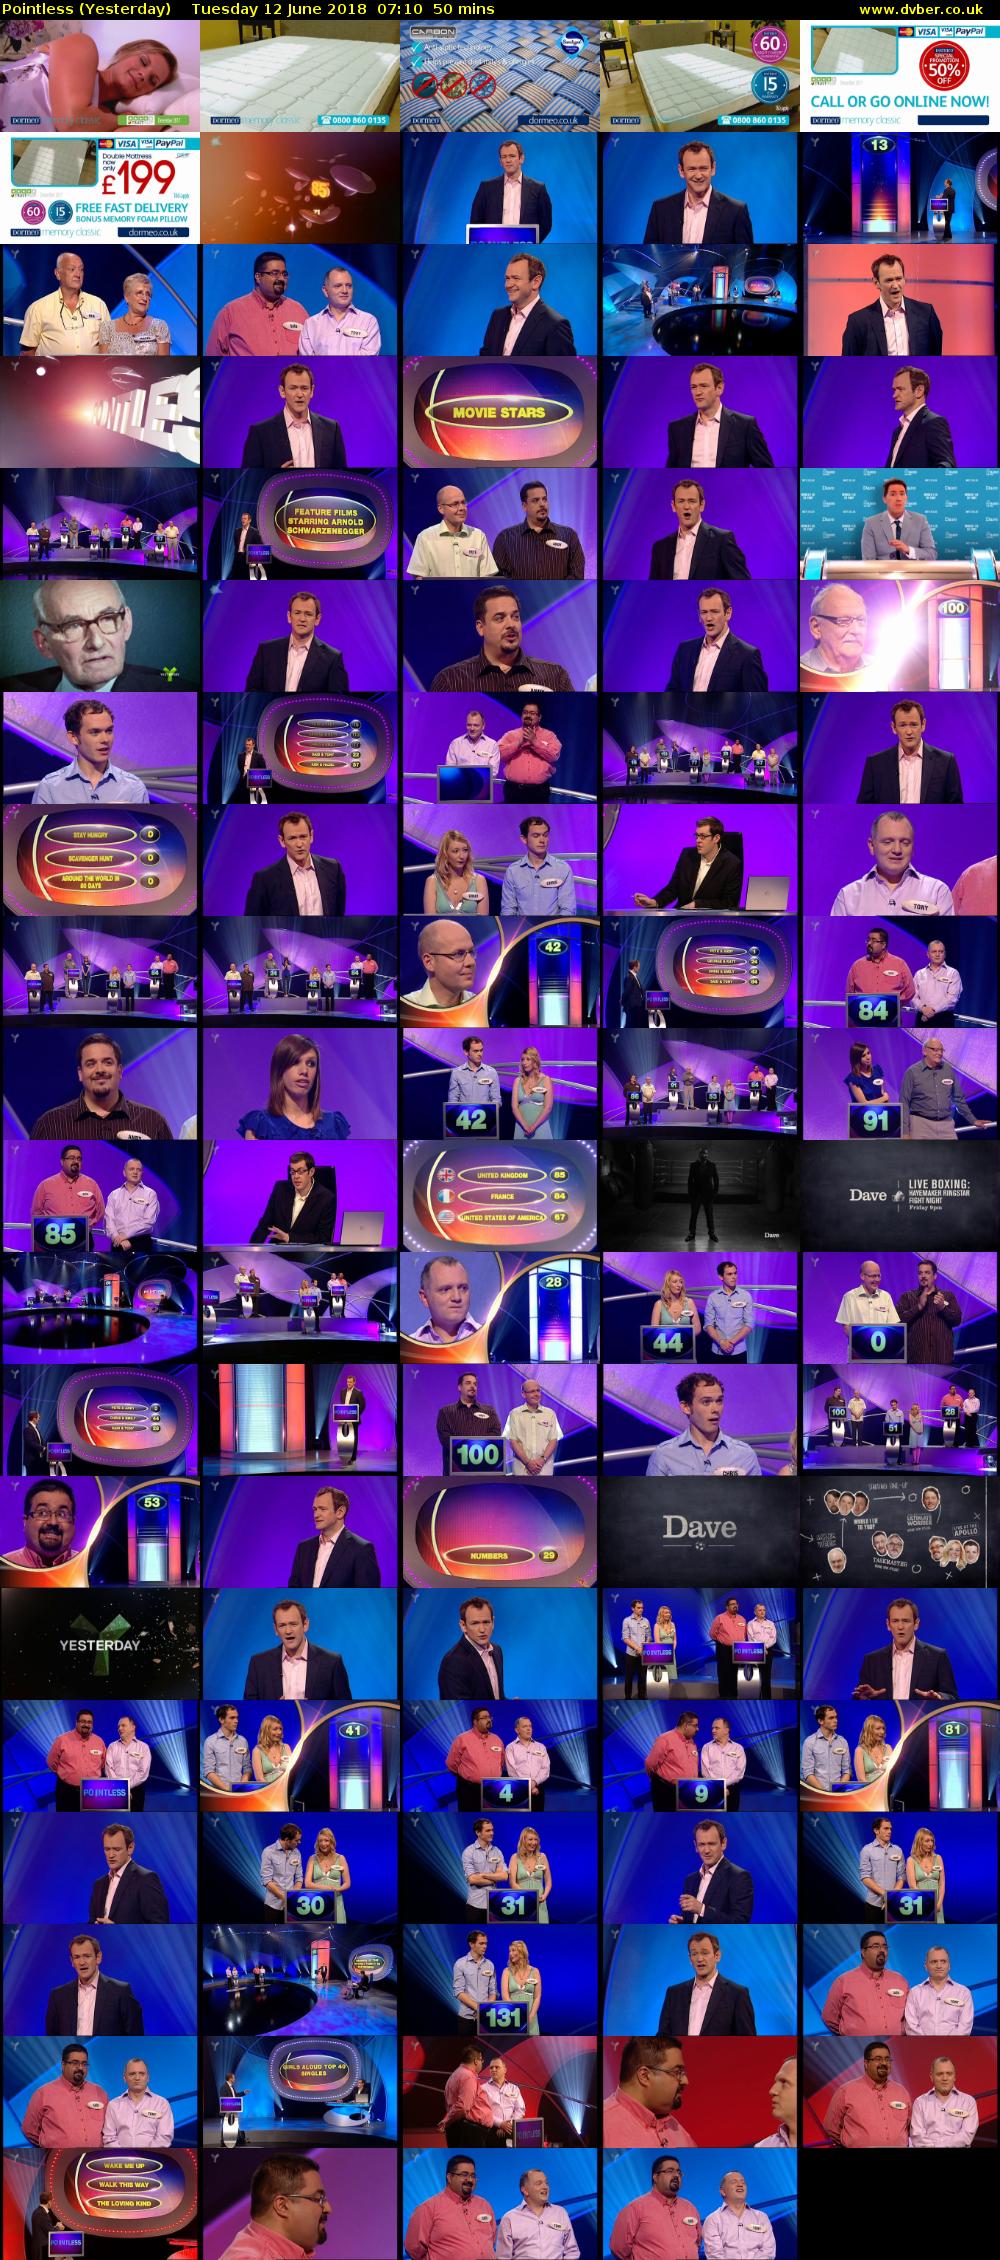 Pointless (Yesterday) Tuesday 12 June 2018 07:10 - 08:00